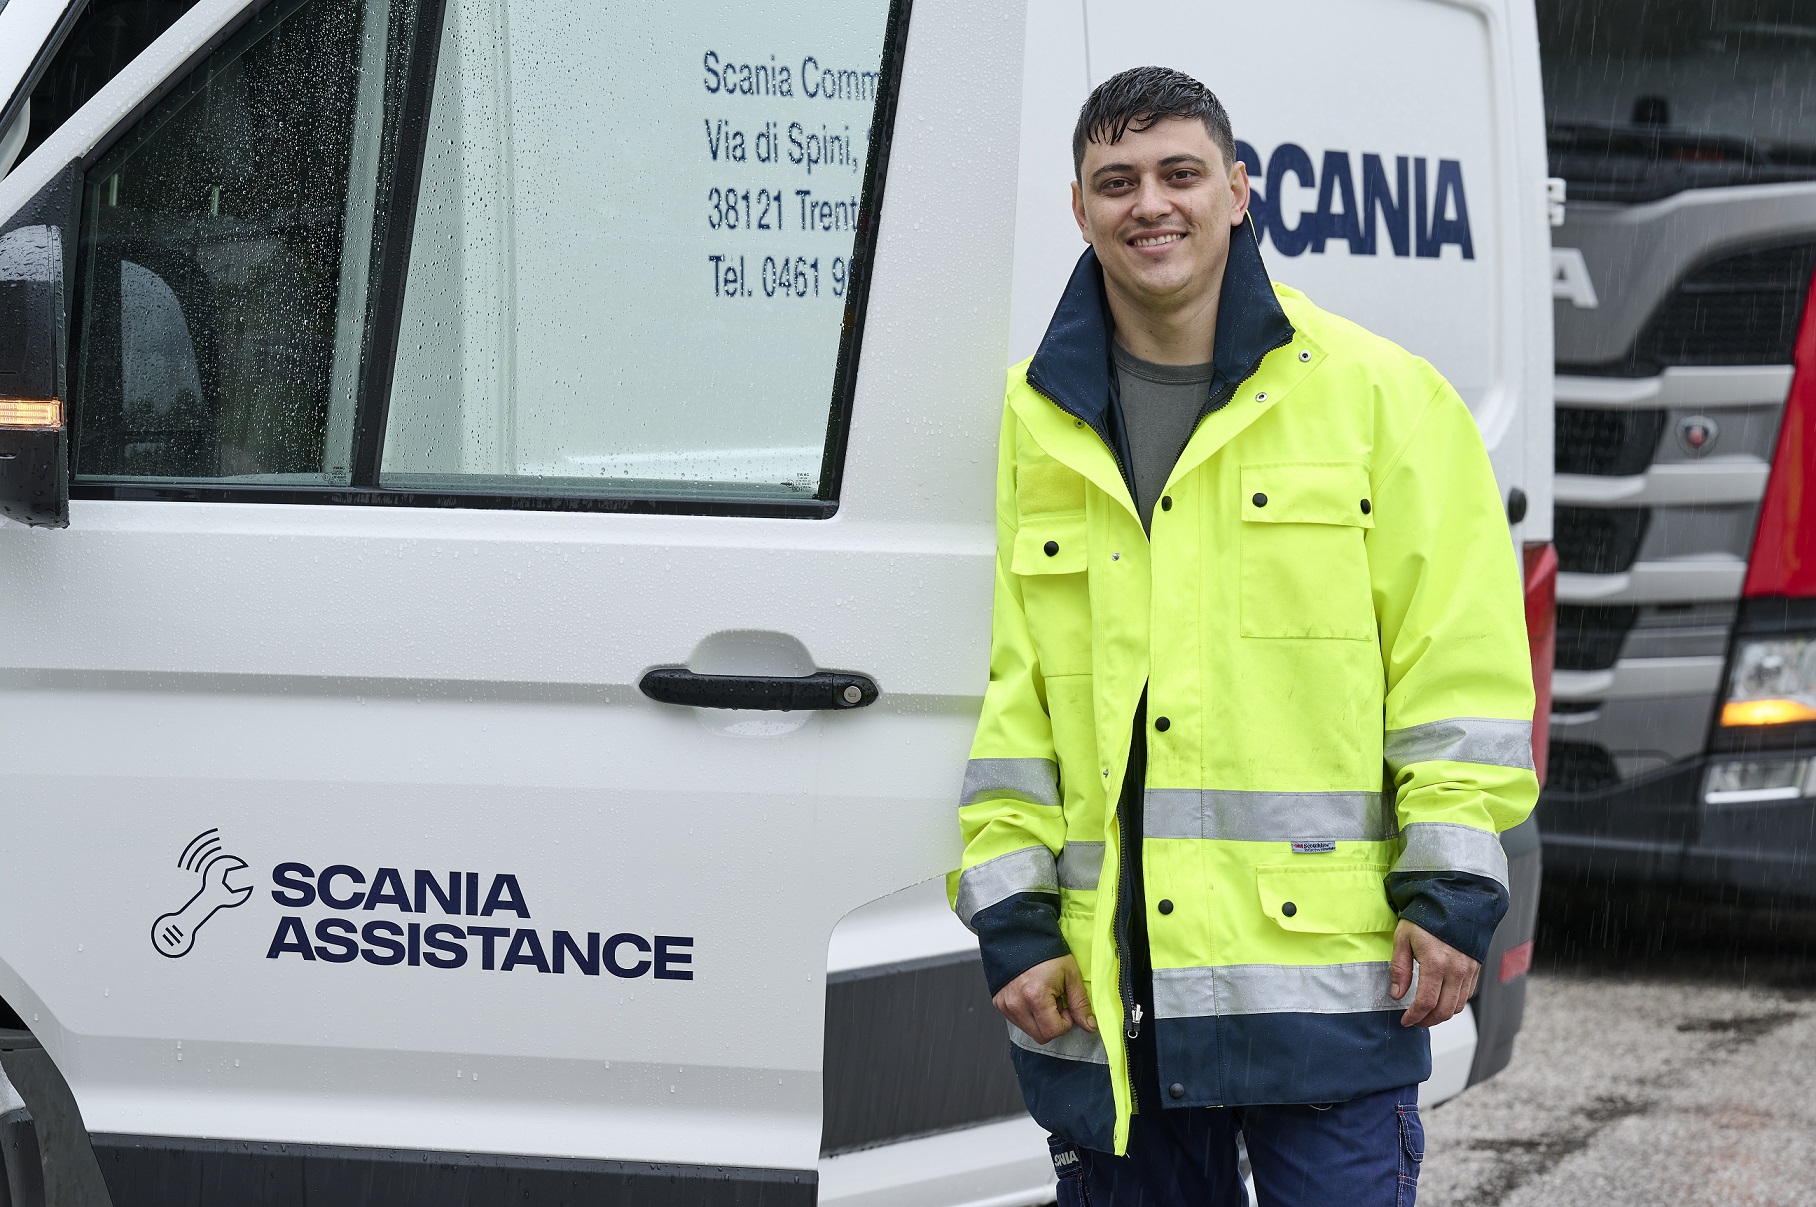 Scania Assistance celebrates 25 years